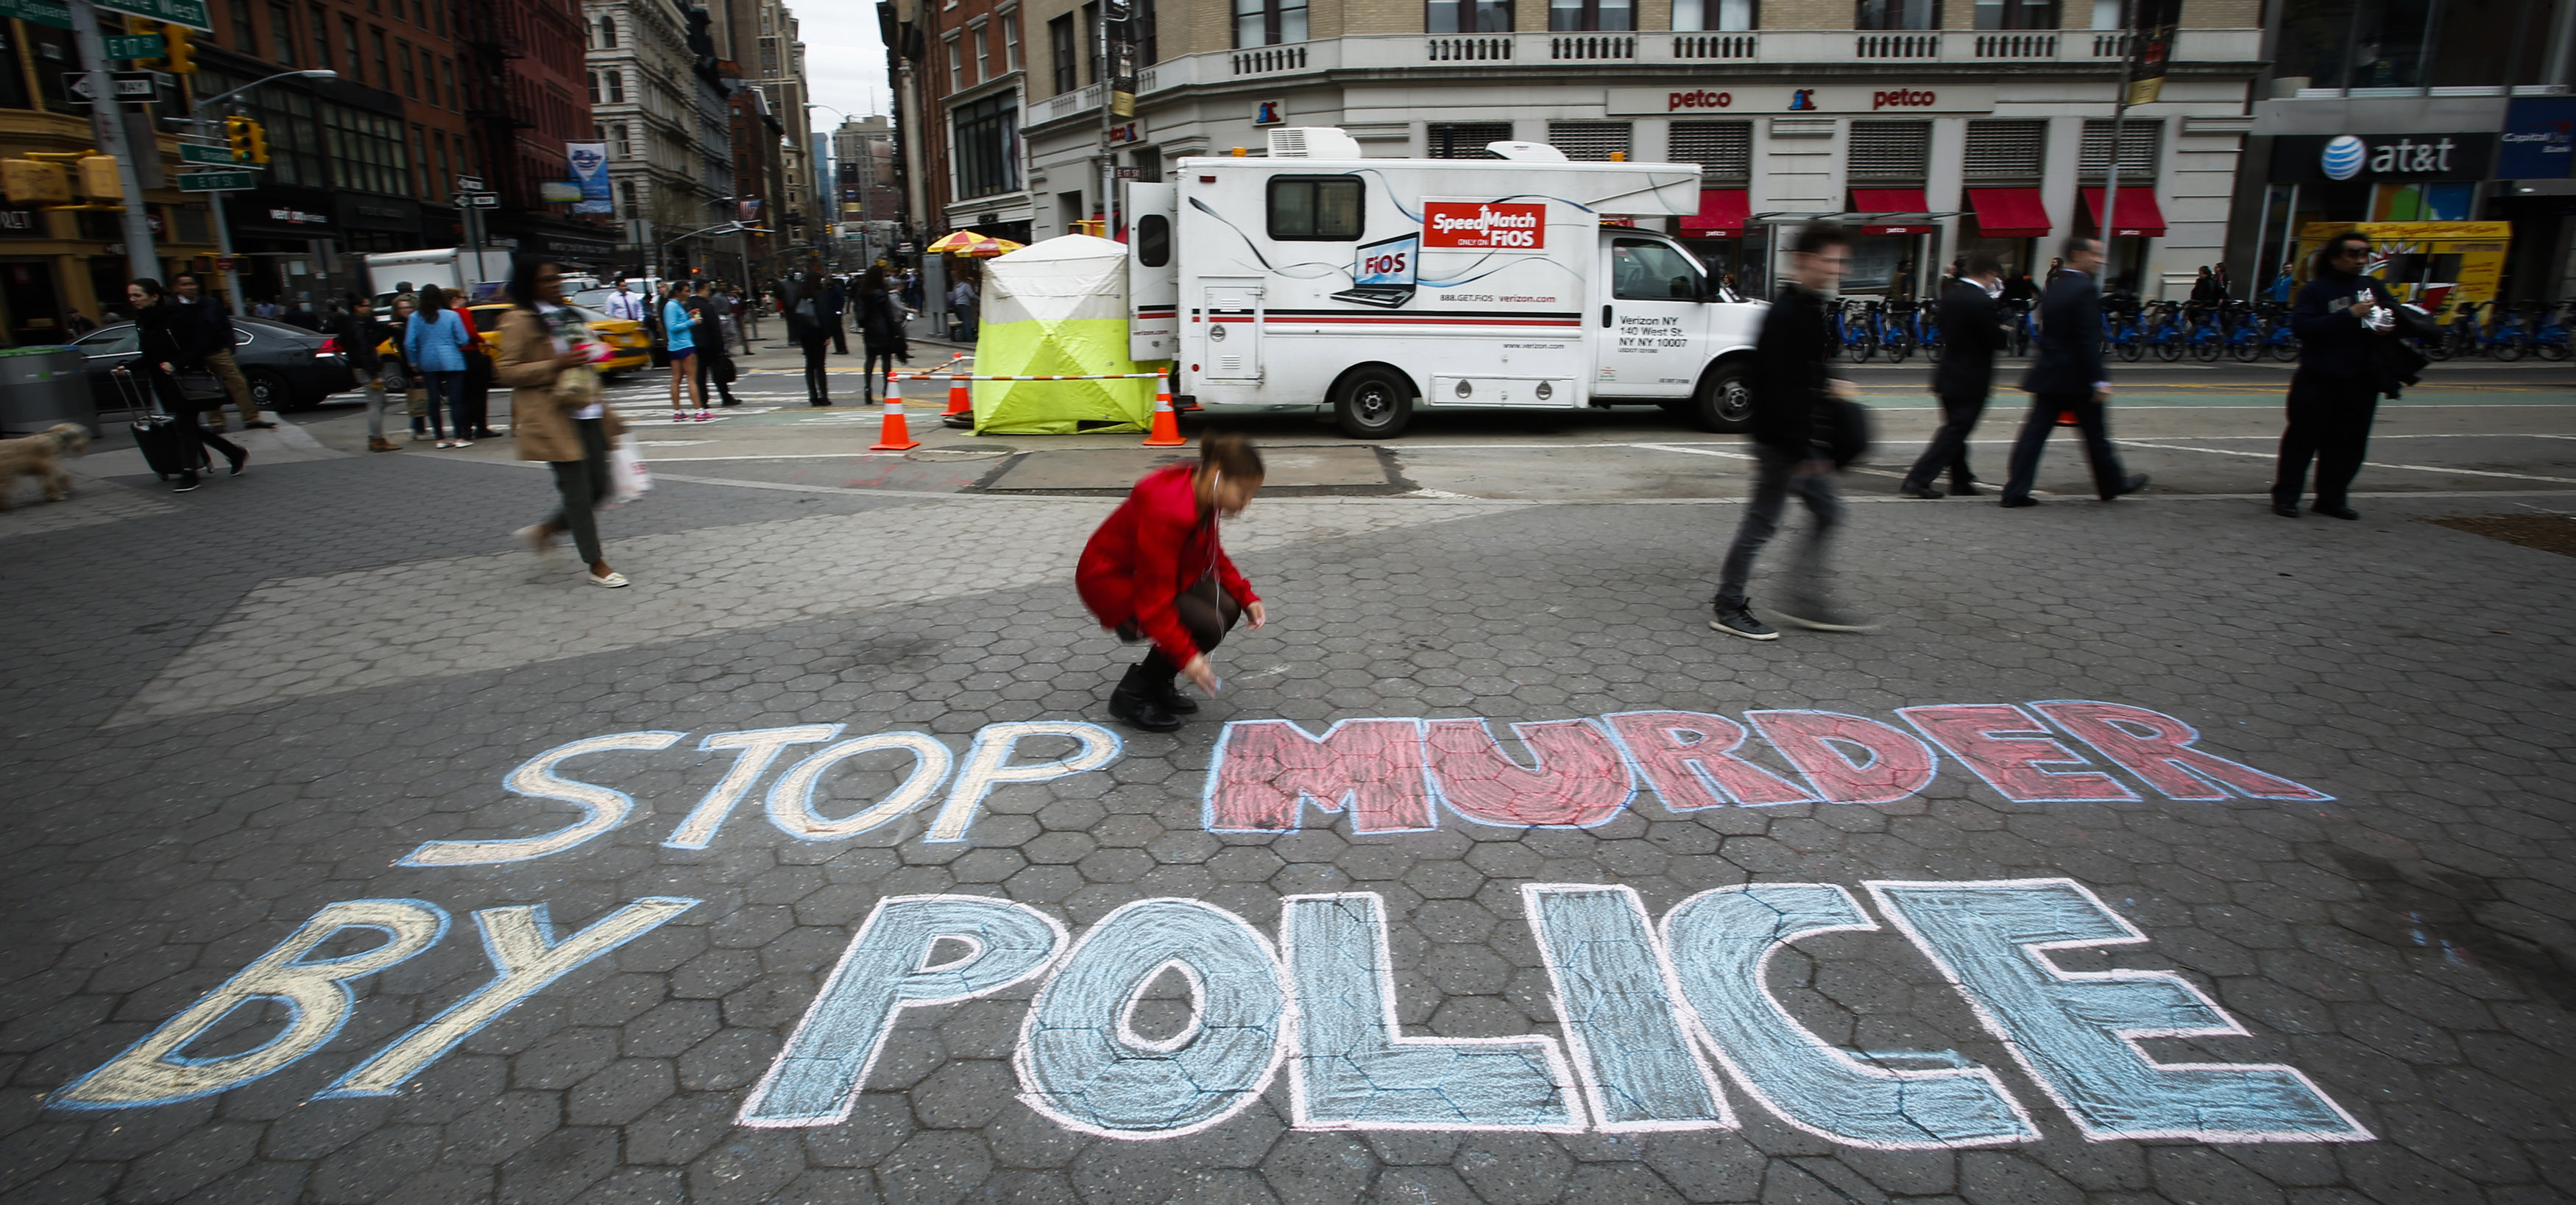 The Violence And Police Brutality